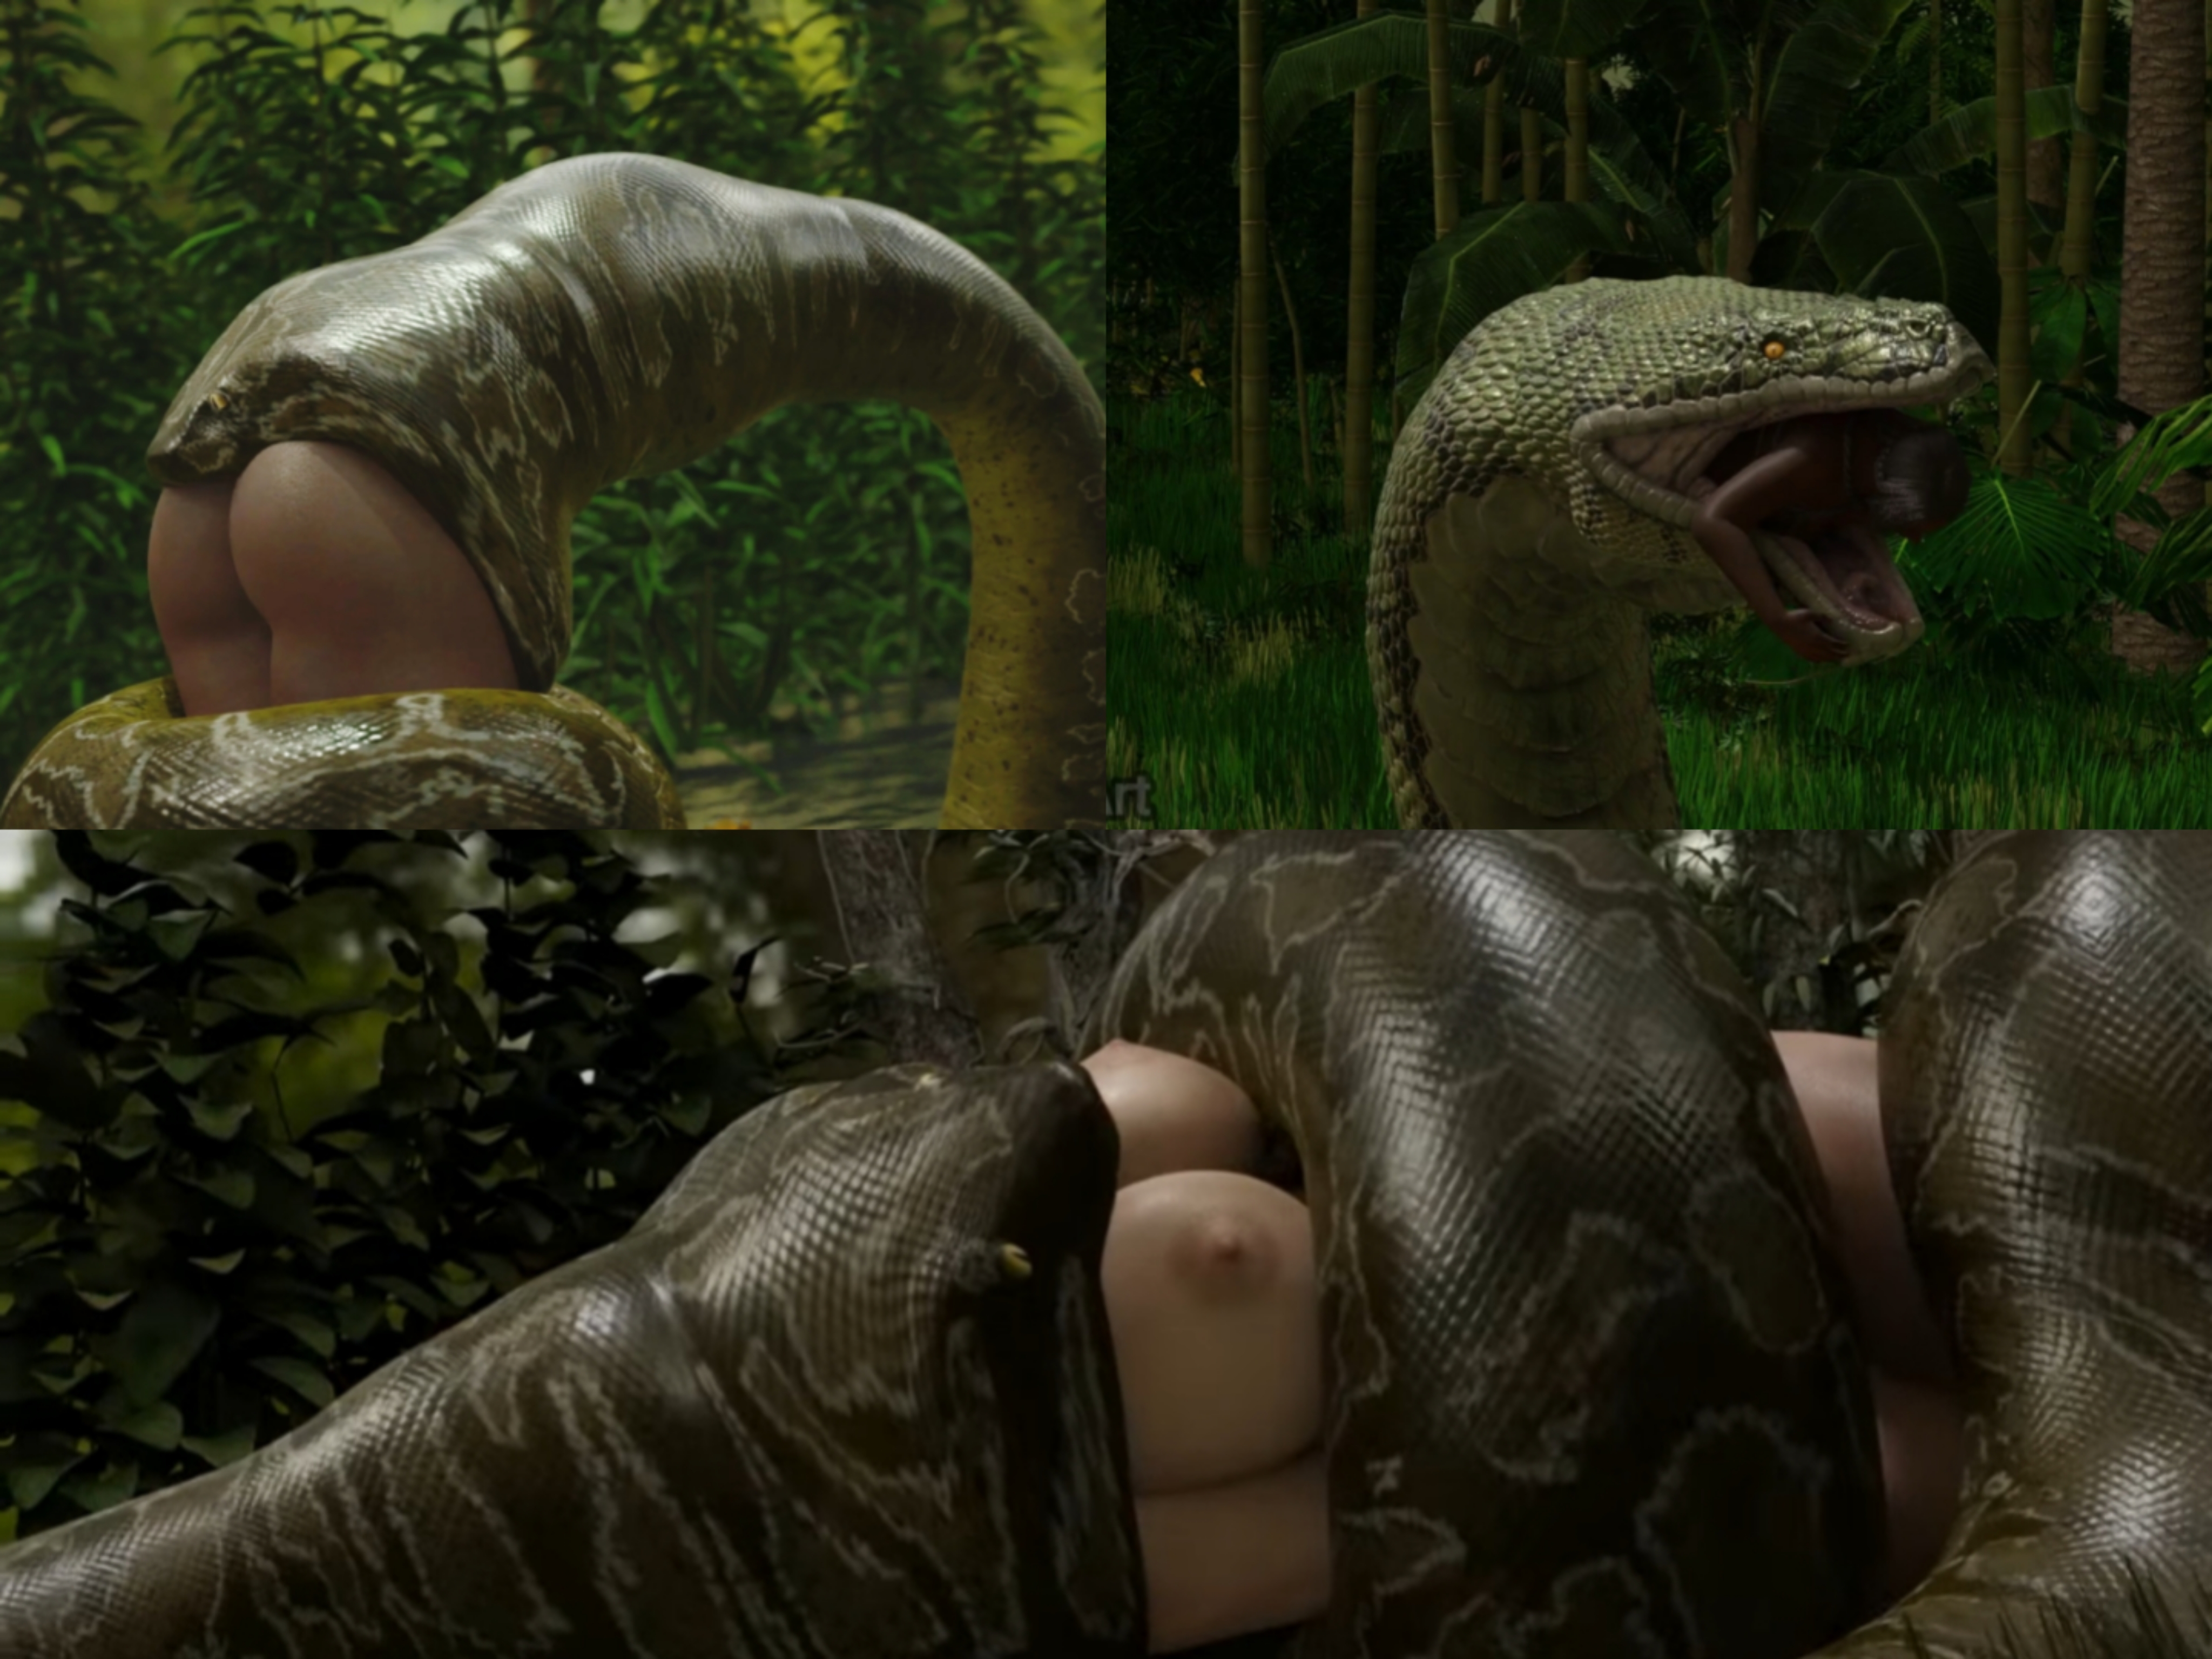 4096px x 3072px - Snake vore collection *DaffisArt - ThisVid.com